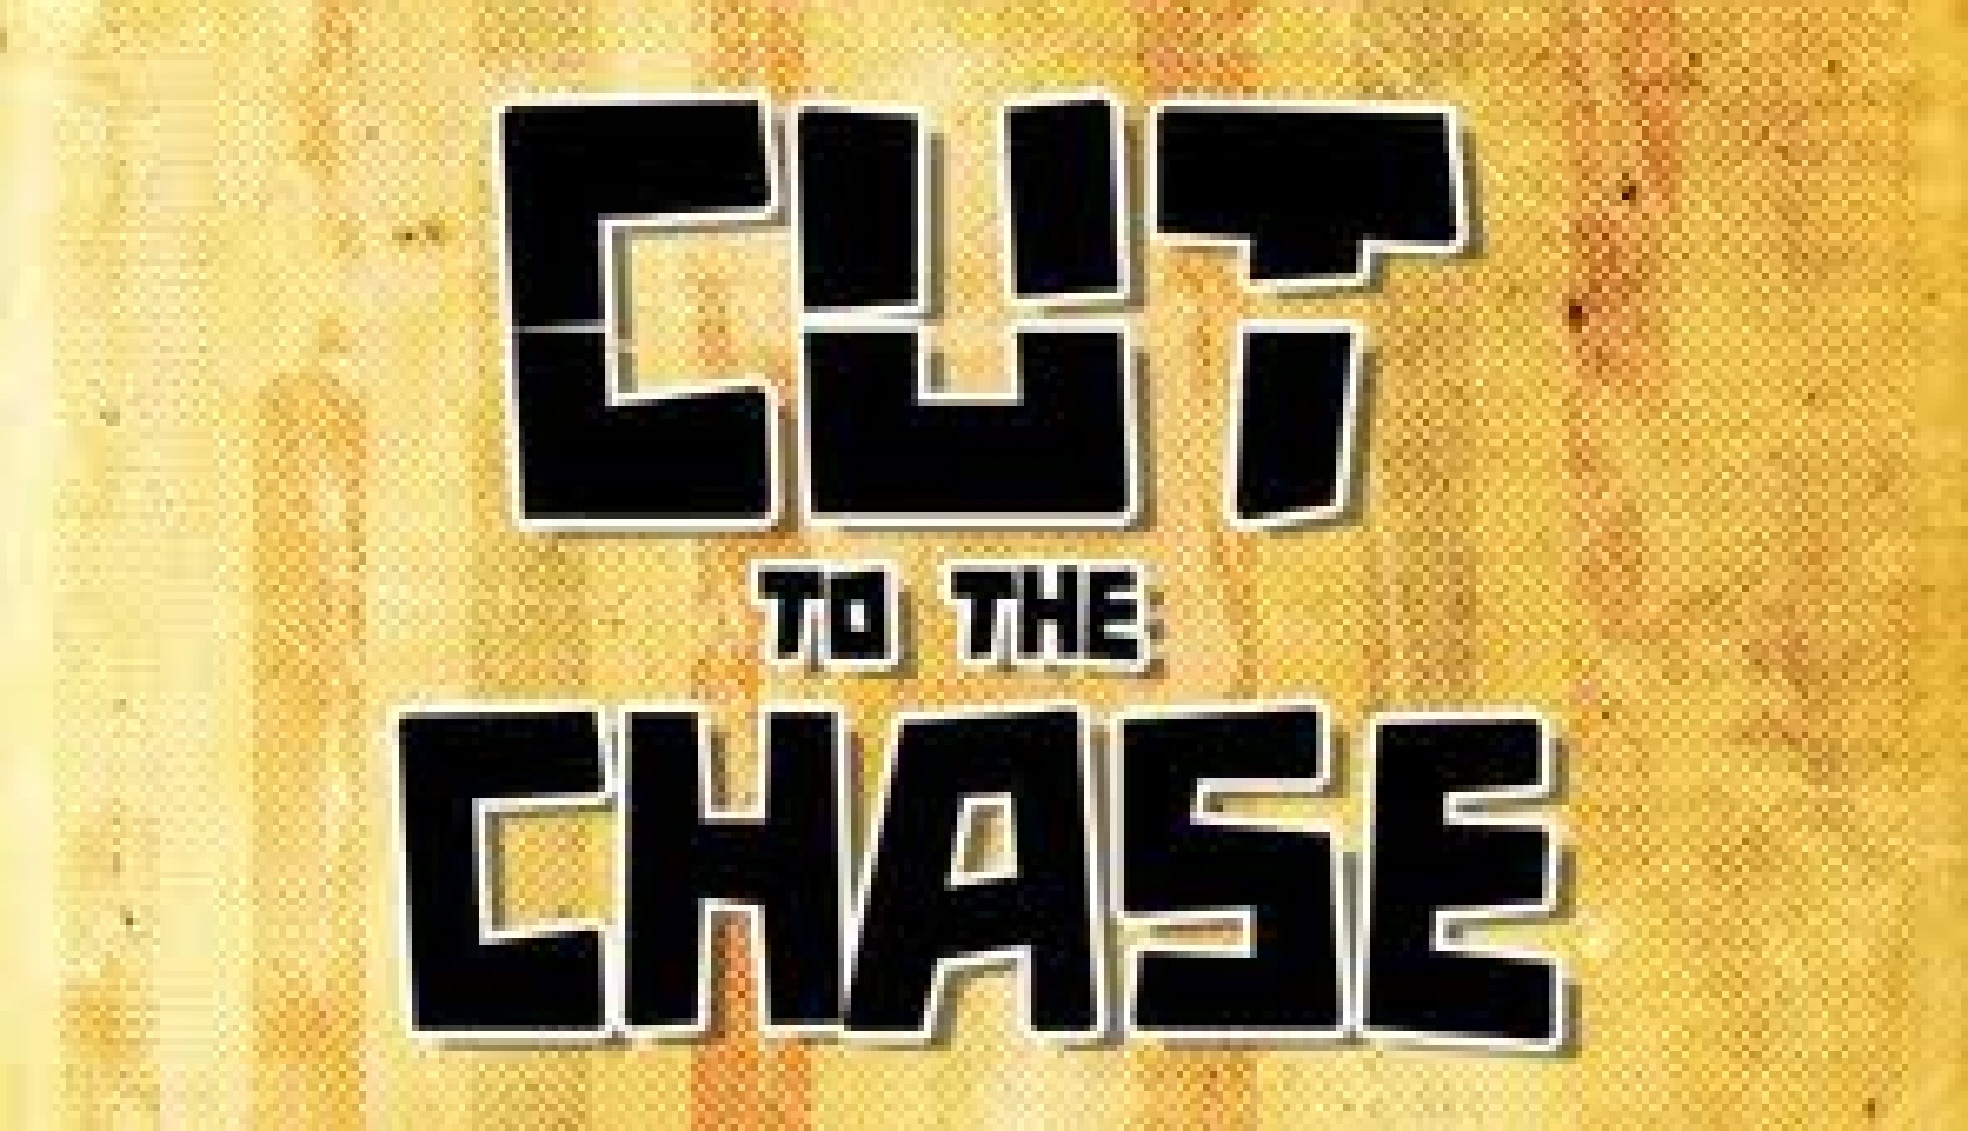 Значение фразы Cut to the chase